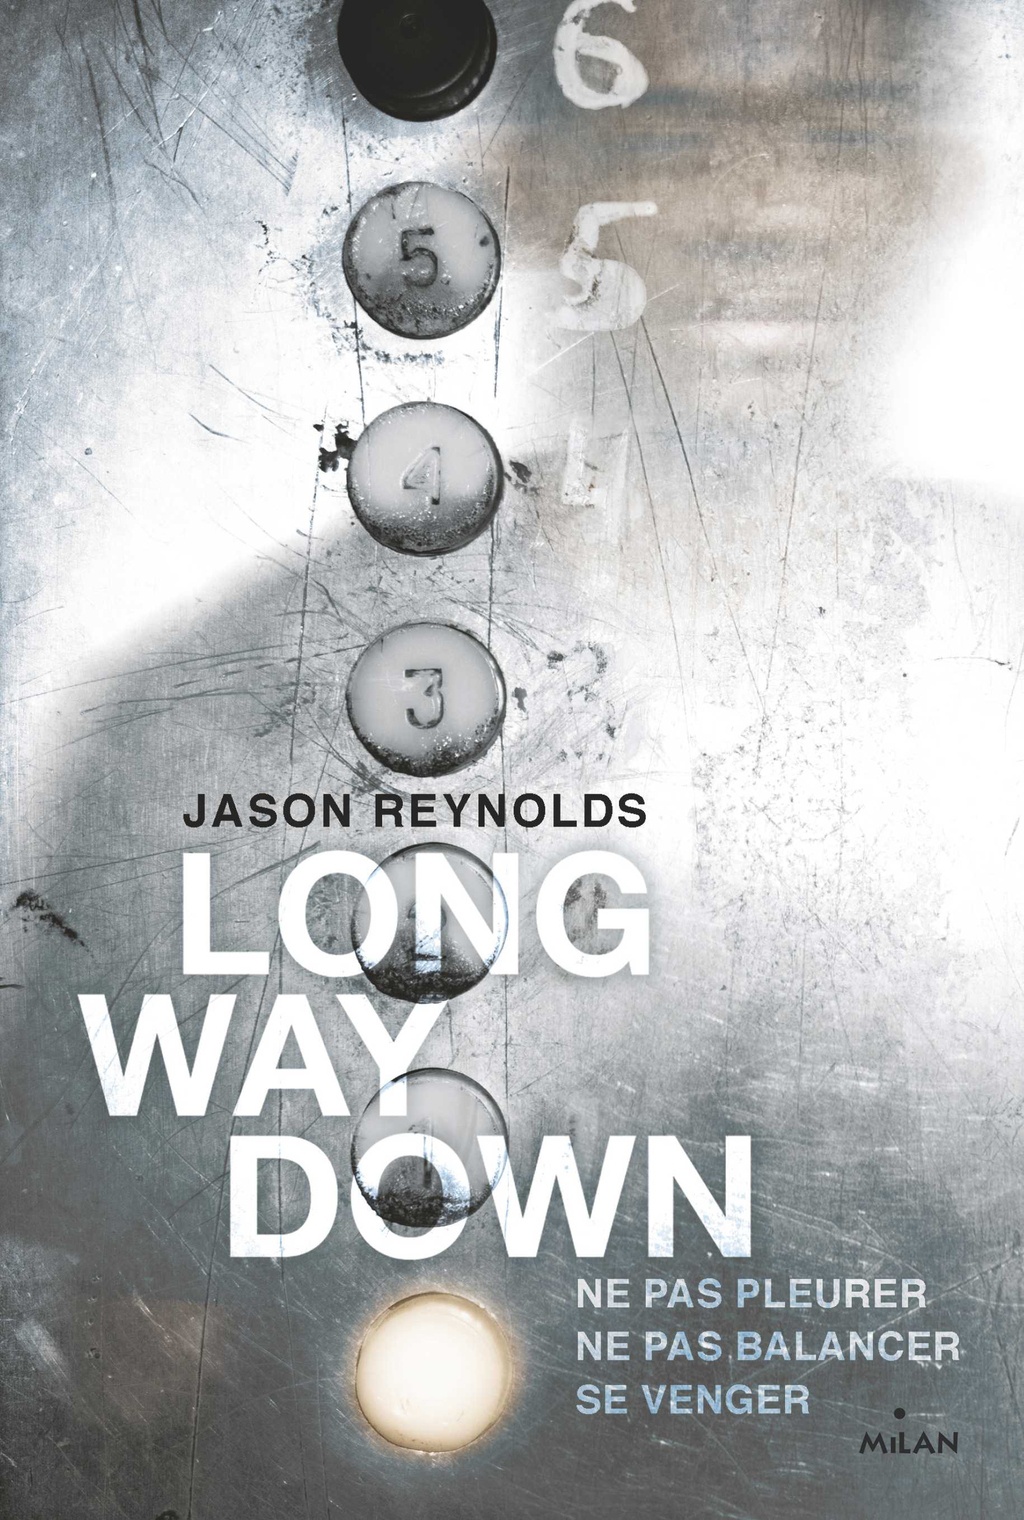 author of long way down